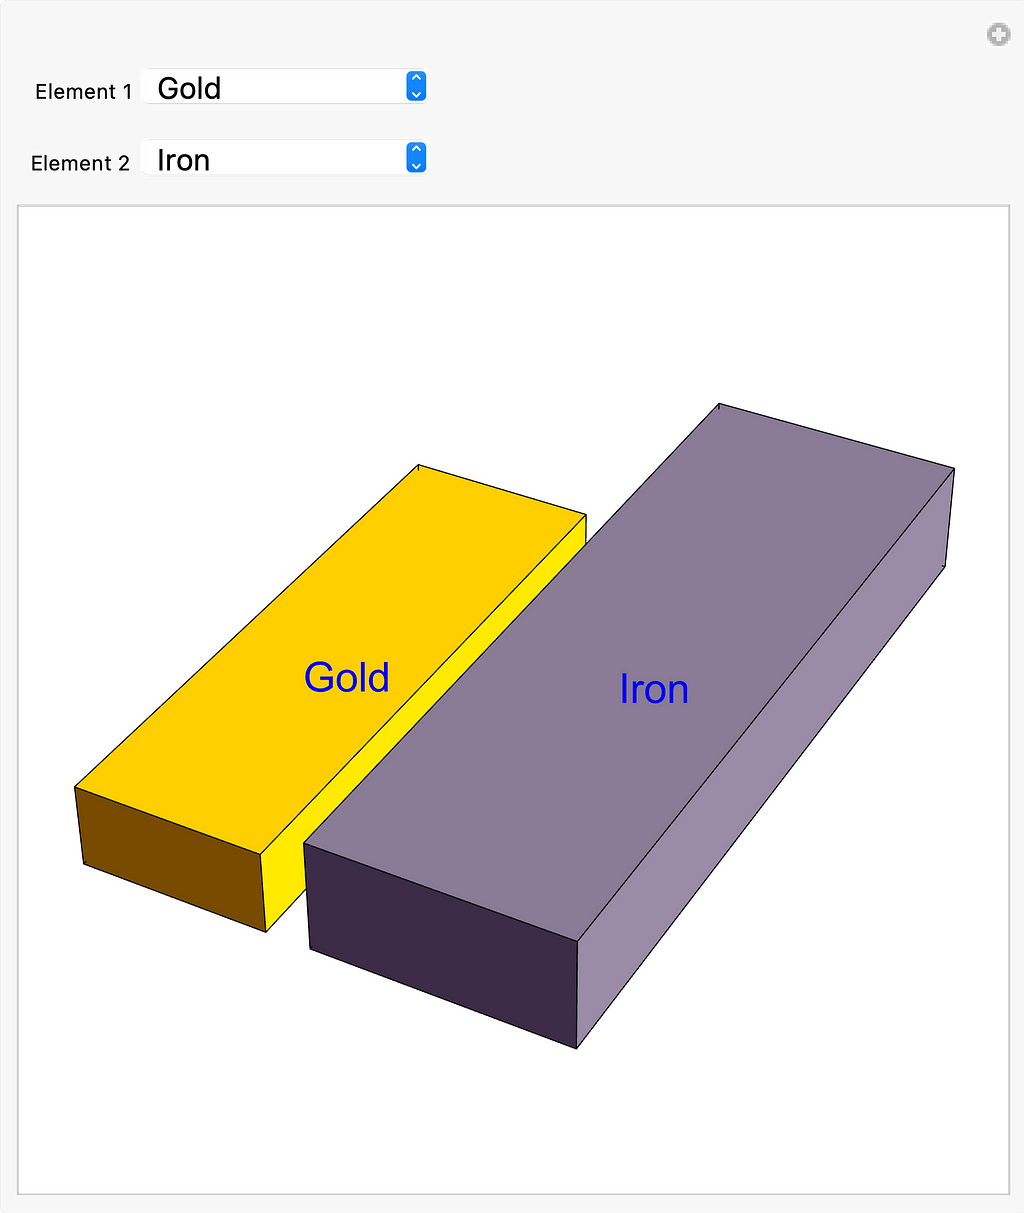 Gold and iron displayed as 3D objects